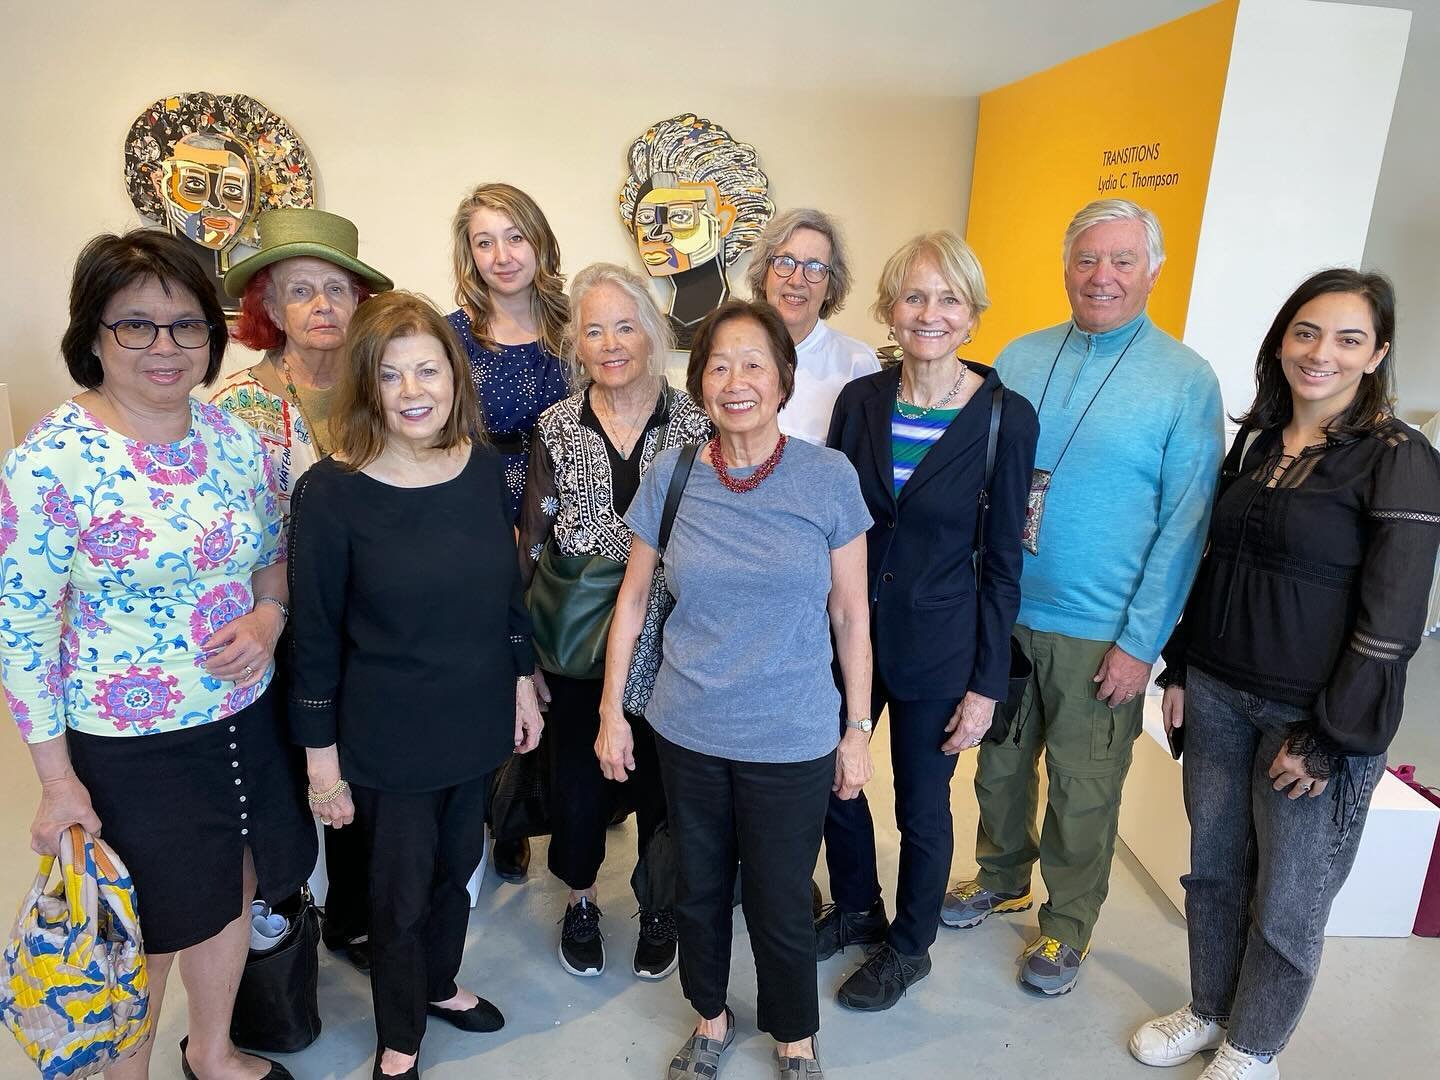 Thank you to all the @nu_millscollege alumni who came to Clay Art Center today for a Guided Exhibitions and Studio Tour. It was great to connect with you all, and share the work of Katherine Choy who graduated from Mills College with a Masters Degree